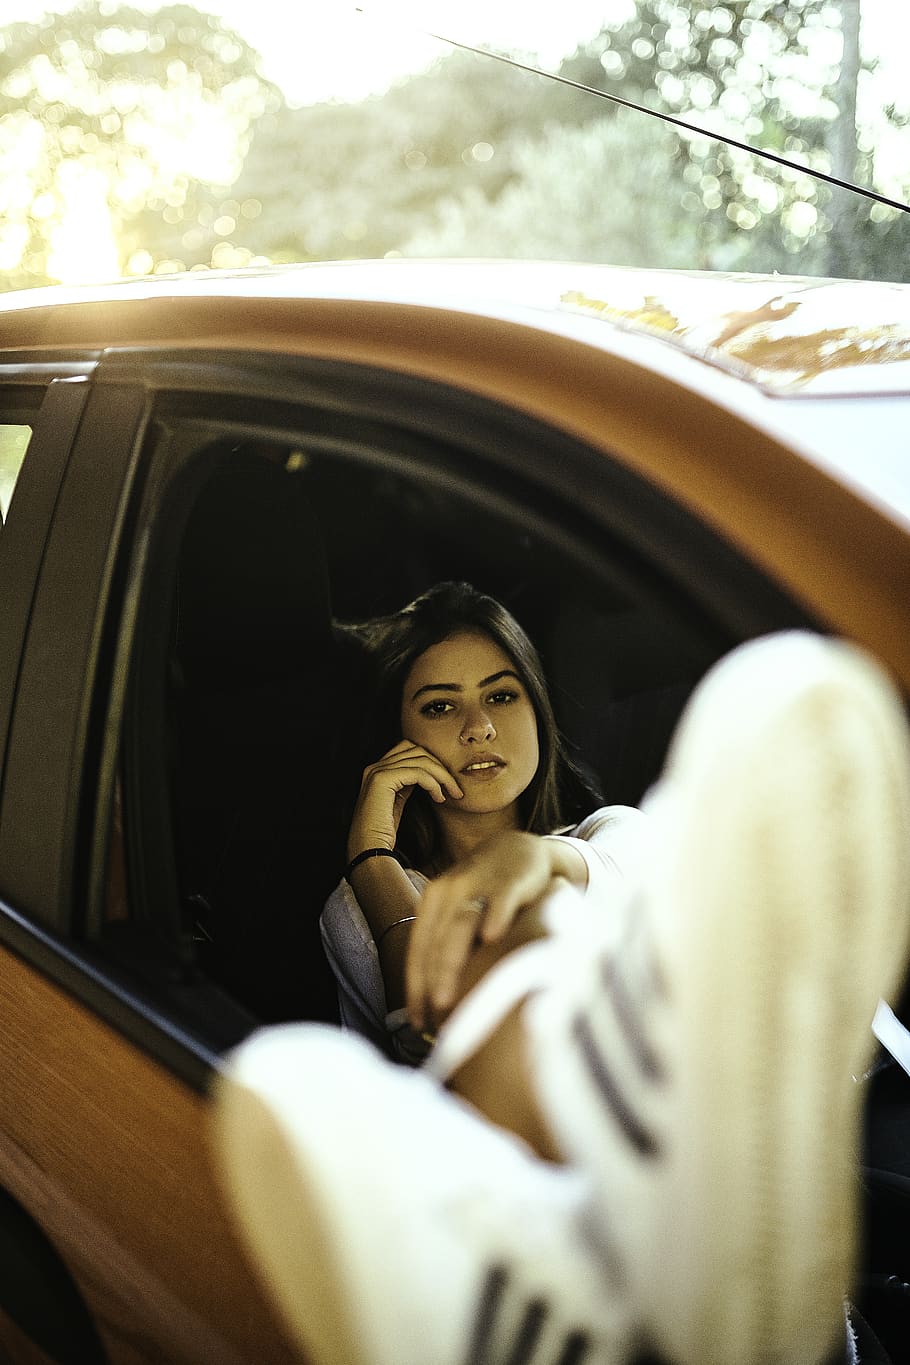 Woman Sitting Inside Car Seat, attractive, automobile, blur, driver